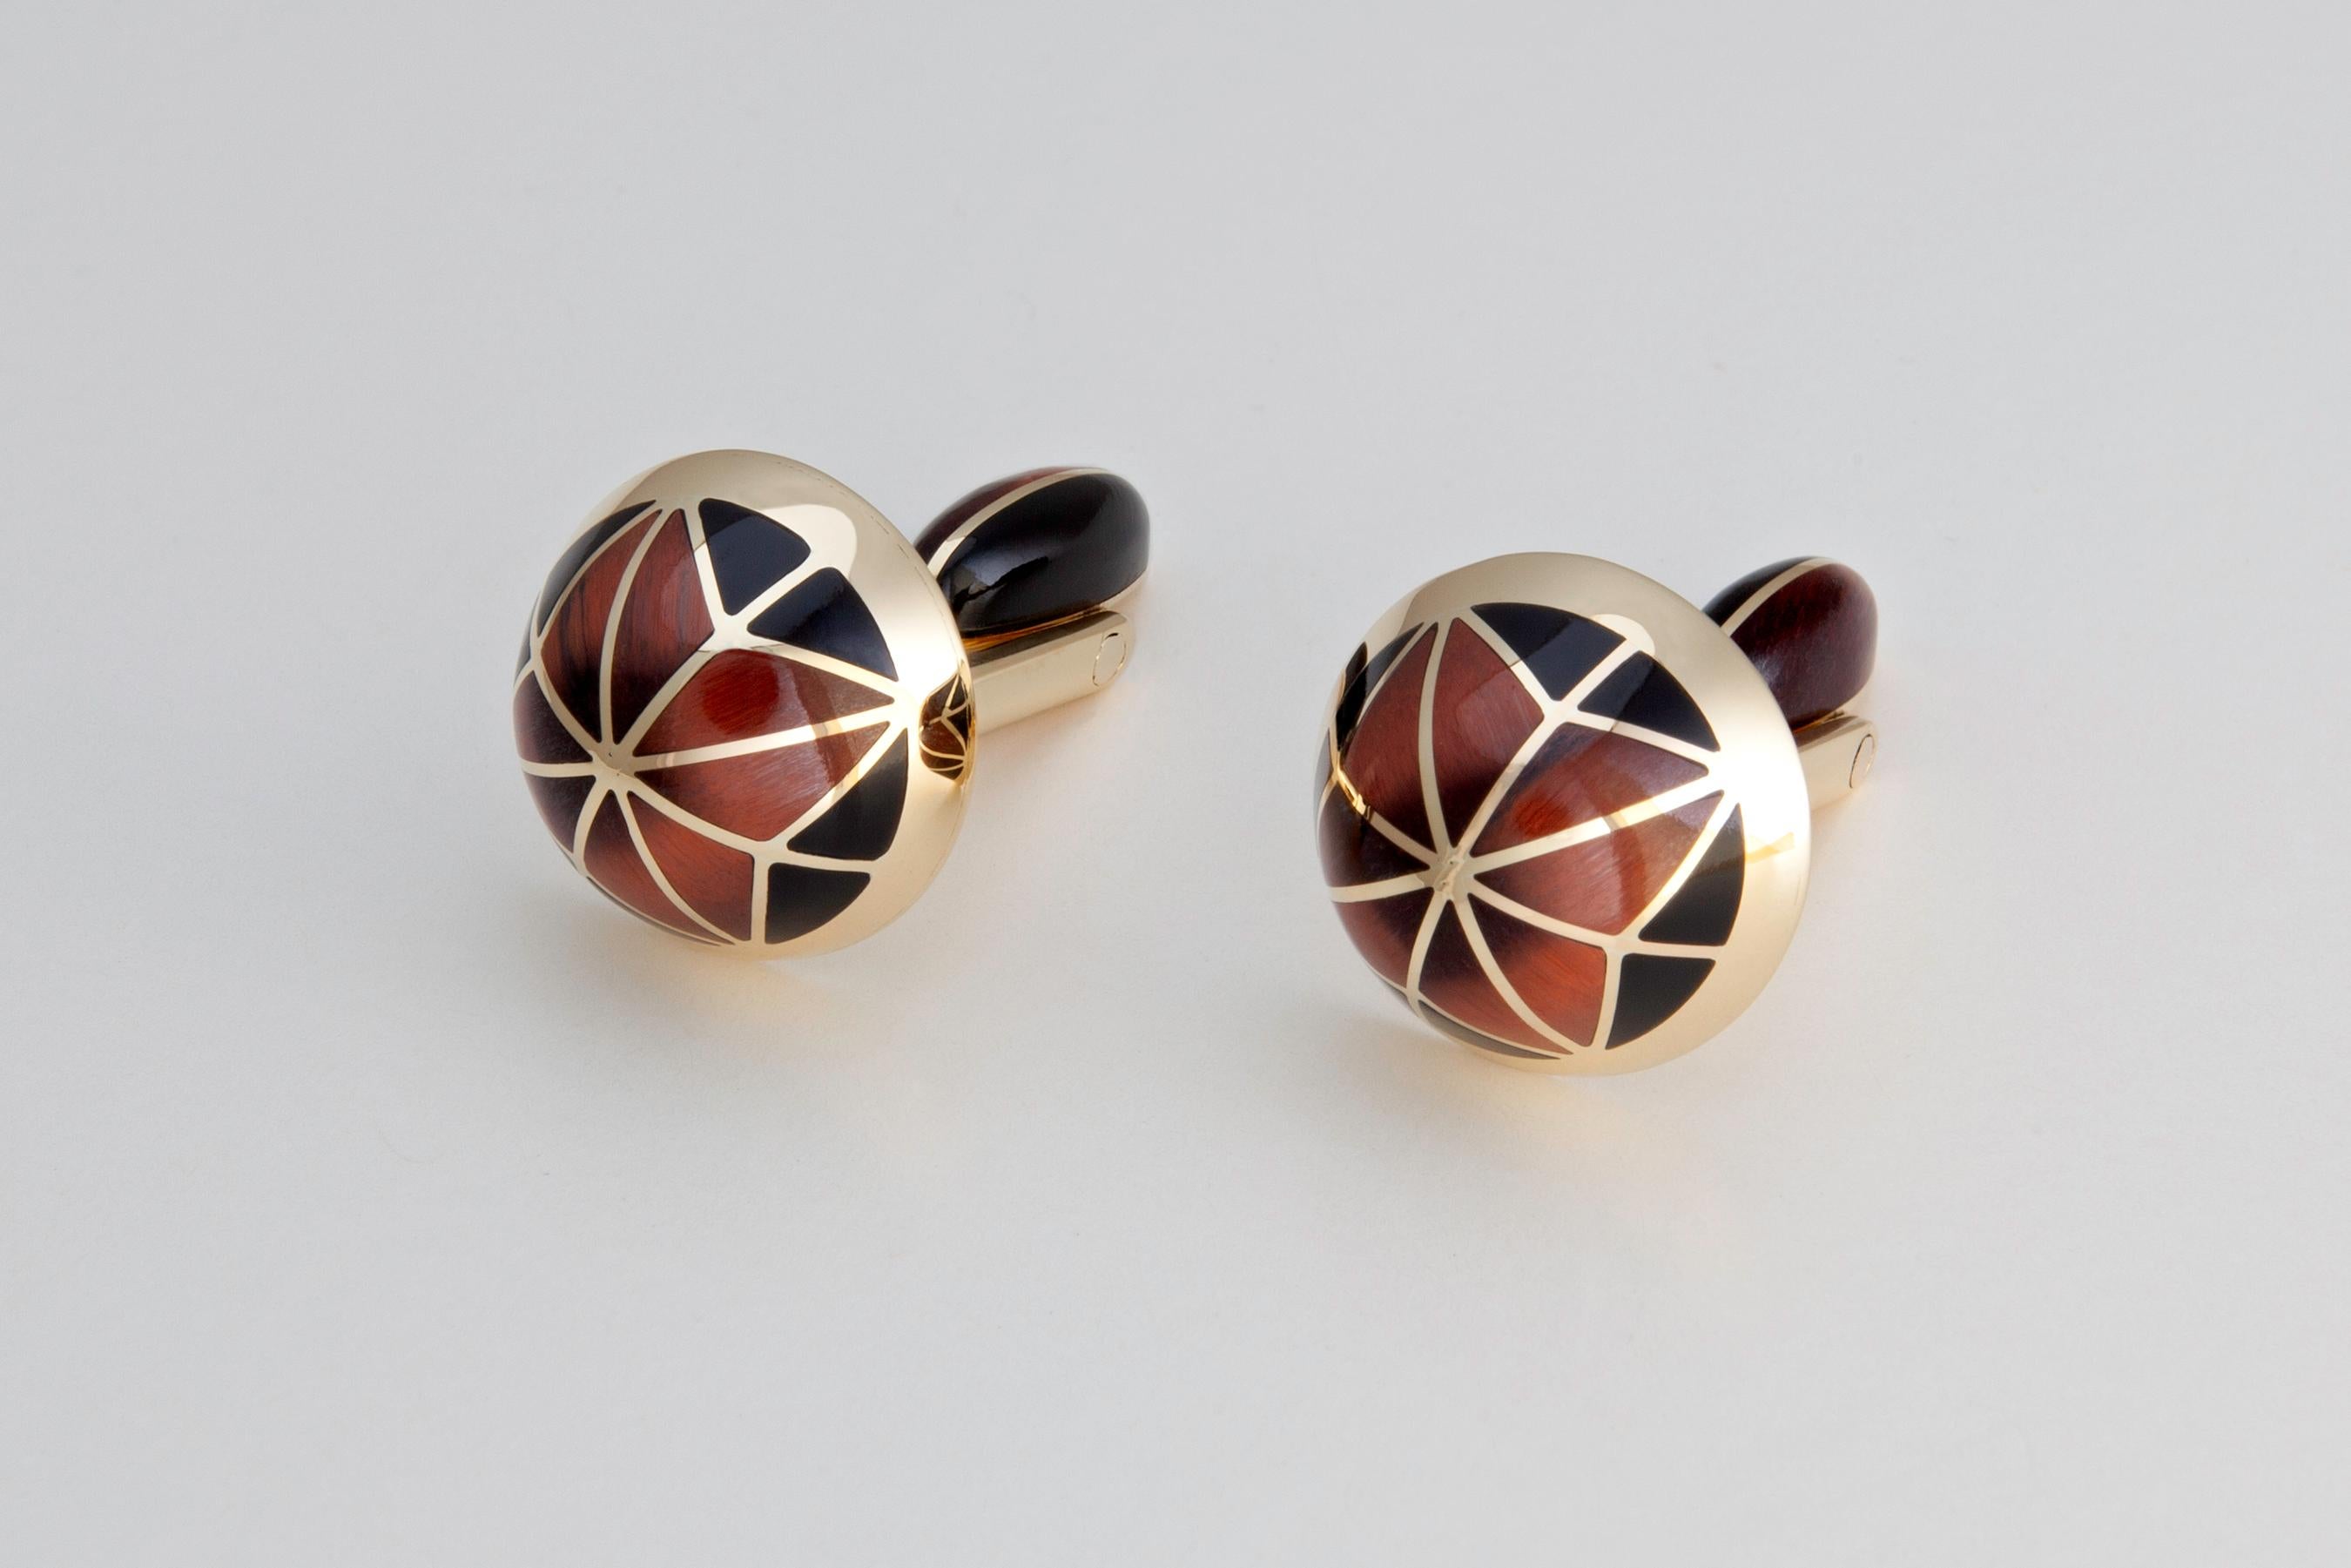  'The Cynosure' cufflinks; fabricated by hand in  18K Yellow Gold, inlaid with Wyoming Black Jade and Australian Tiger Iron, embody the very essence of the word.  By definition, the Cynosure is;  the brightest star in the sky, something serving for